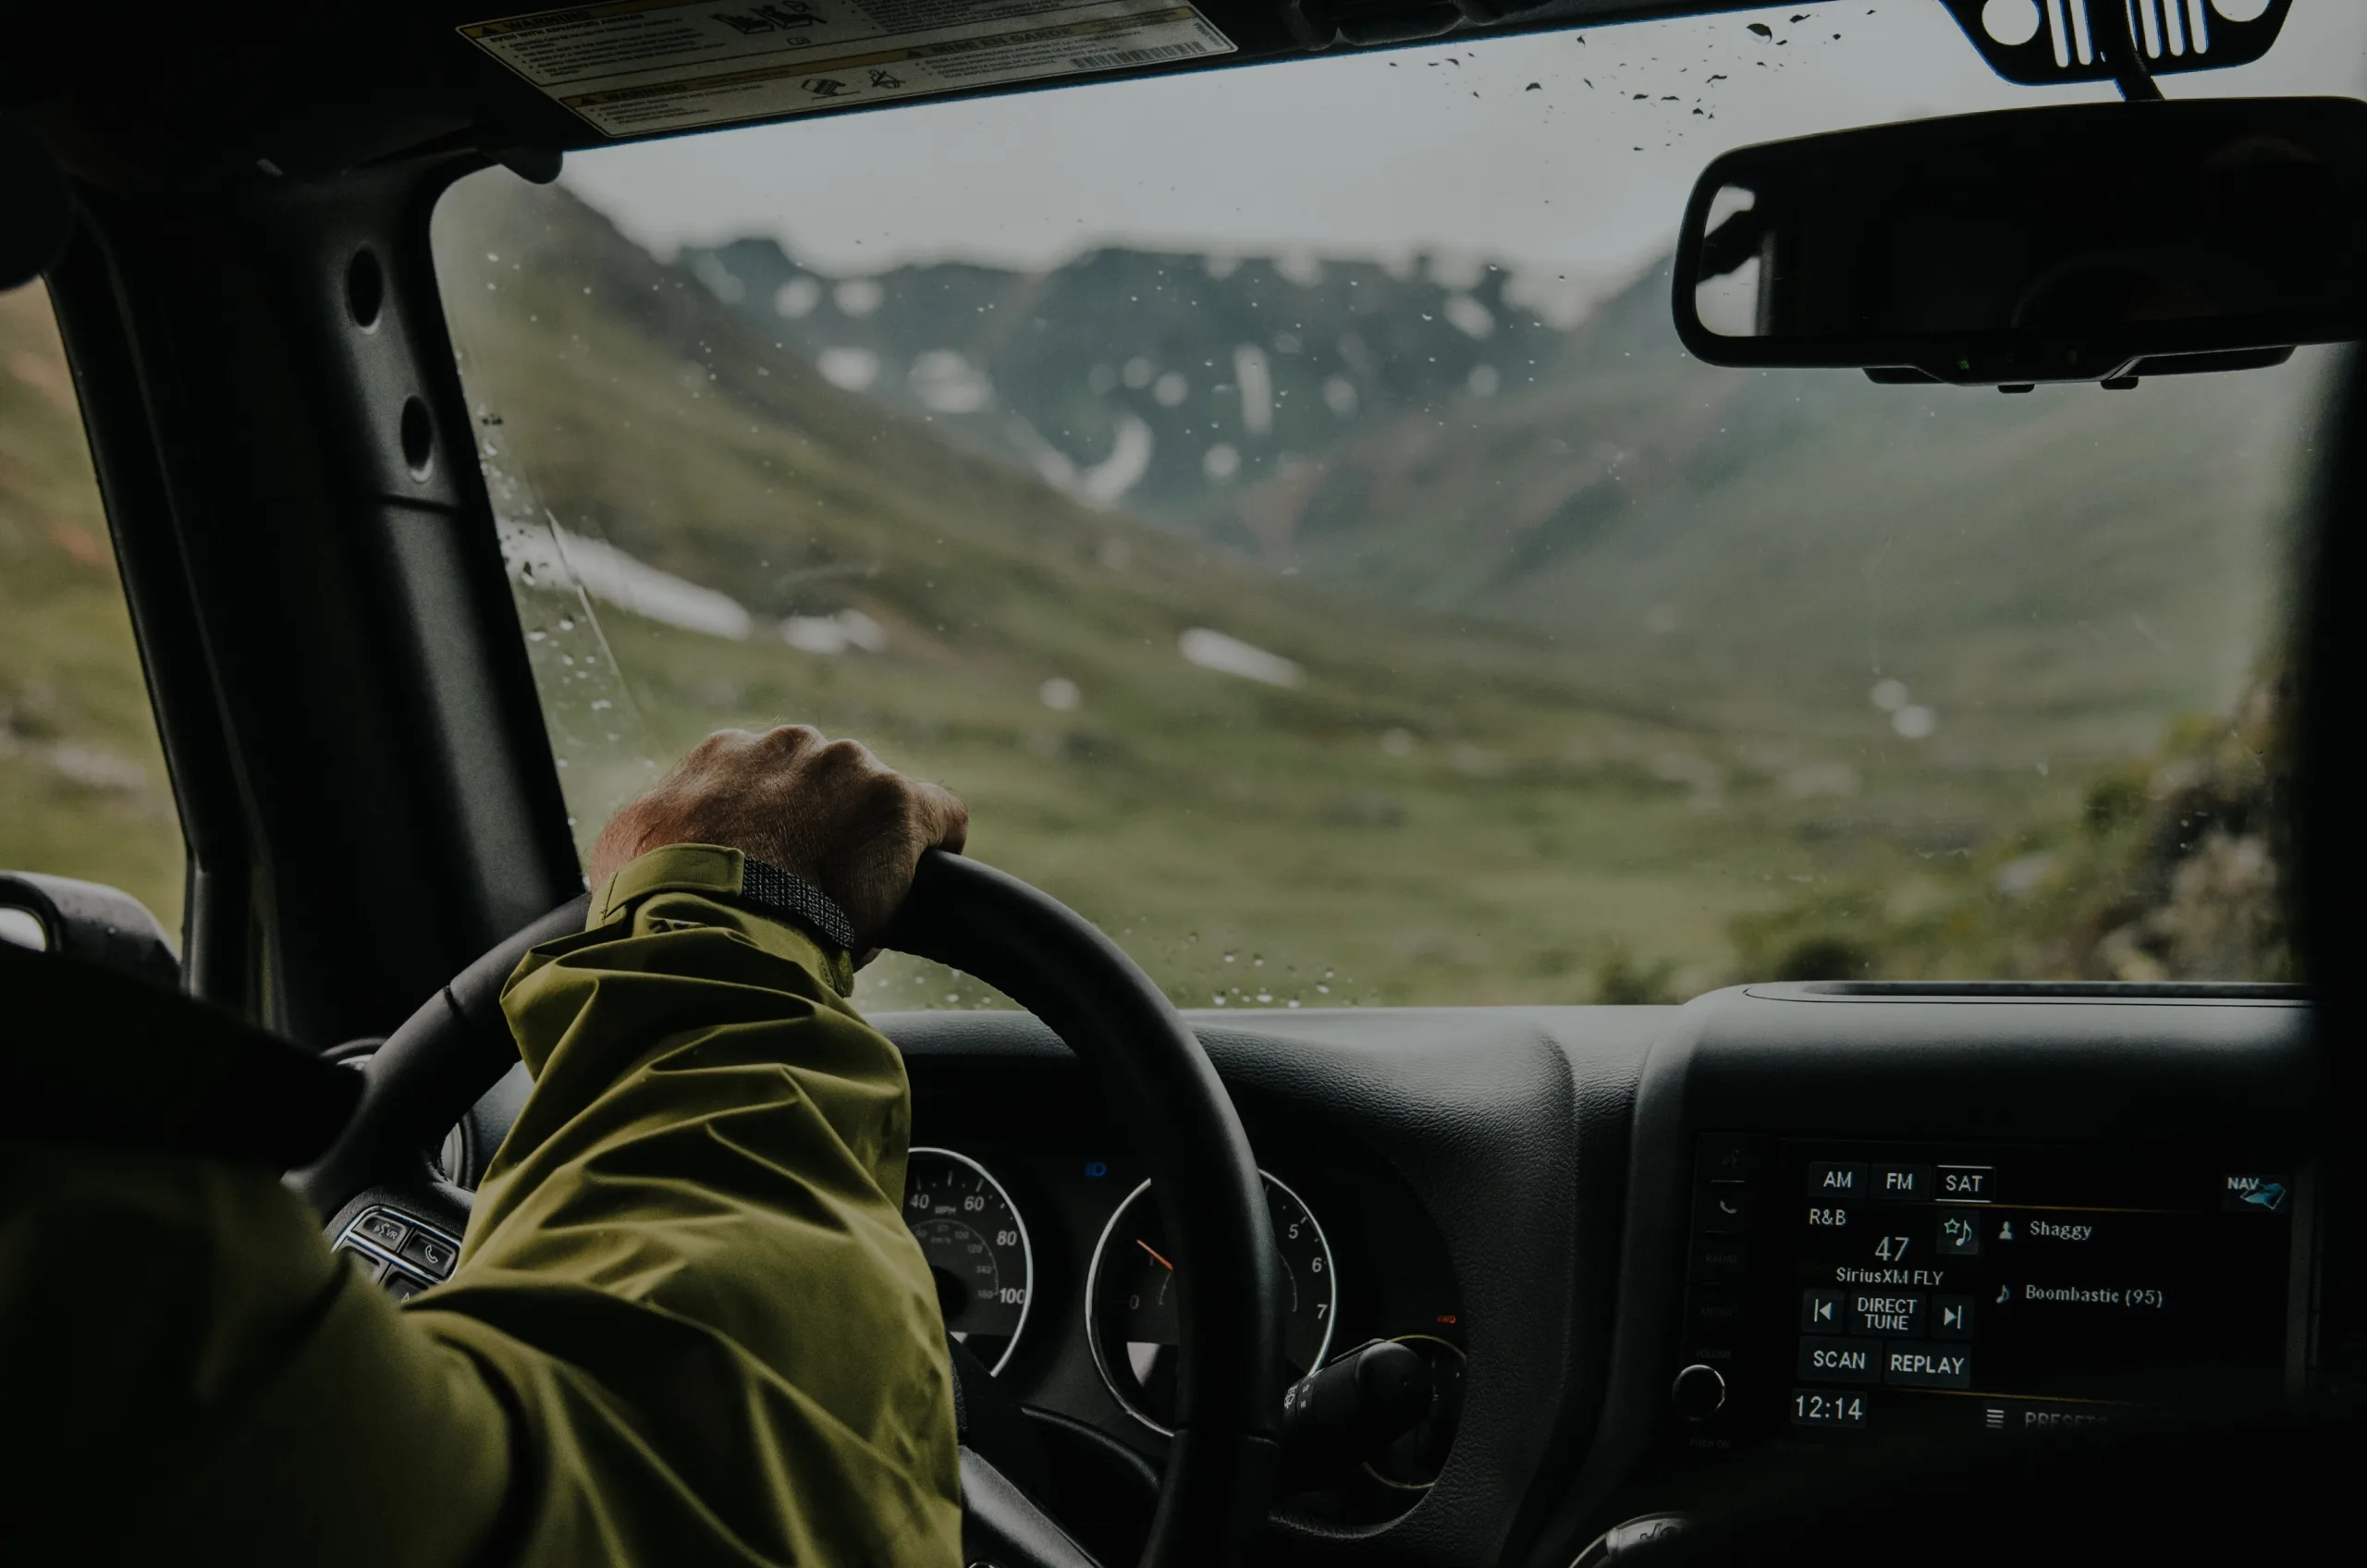 View of a rainy day in mountains through the windshield of a car. A hand and arm are steering the car.
(Aligned and Primed)